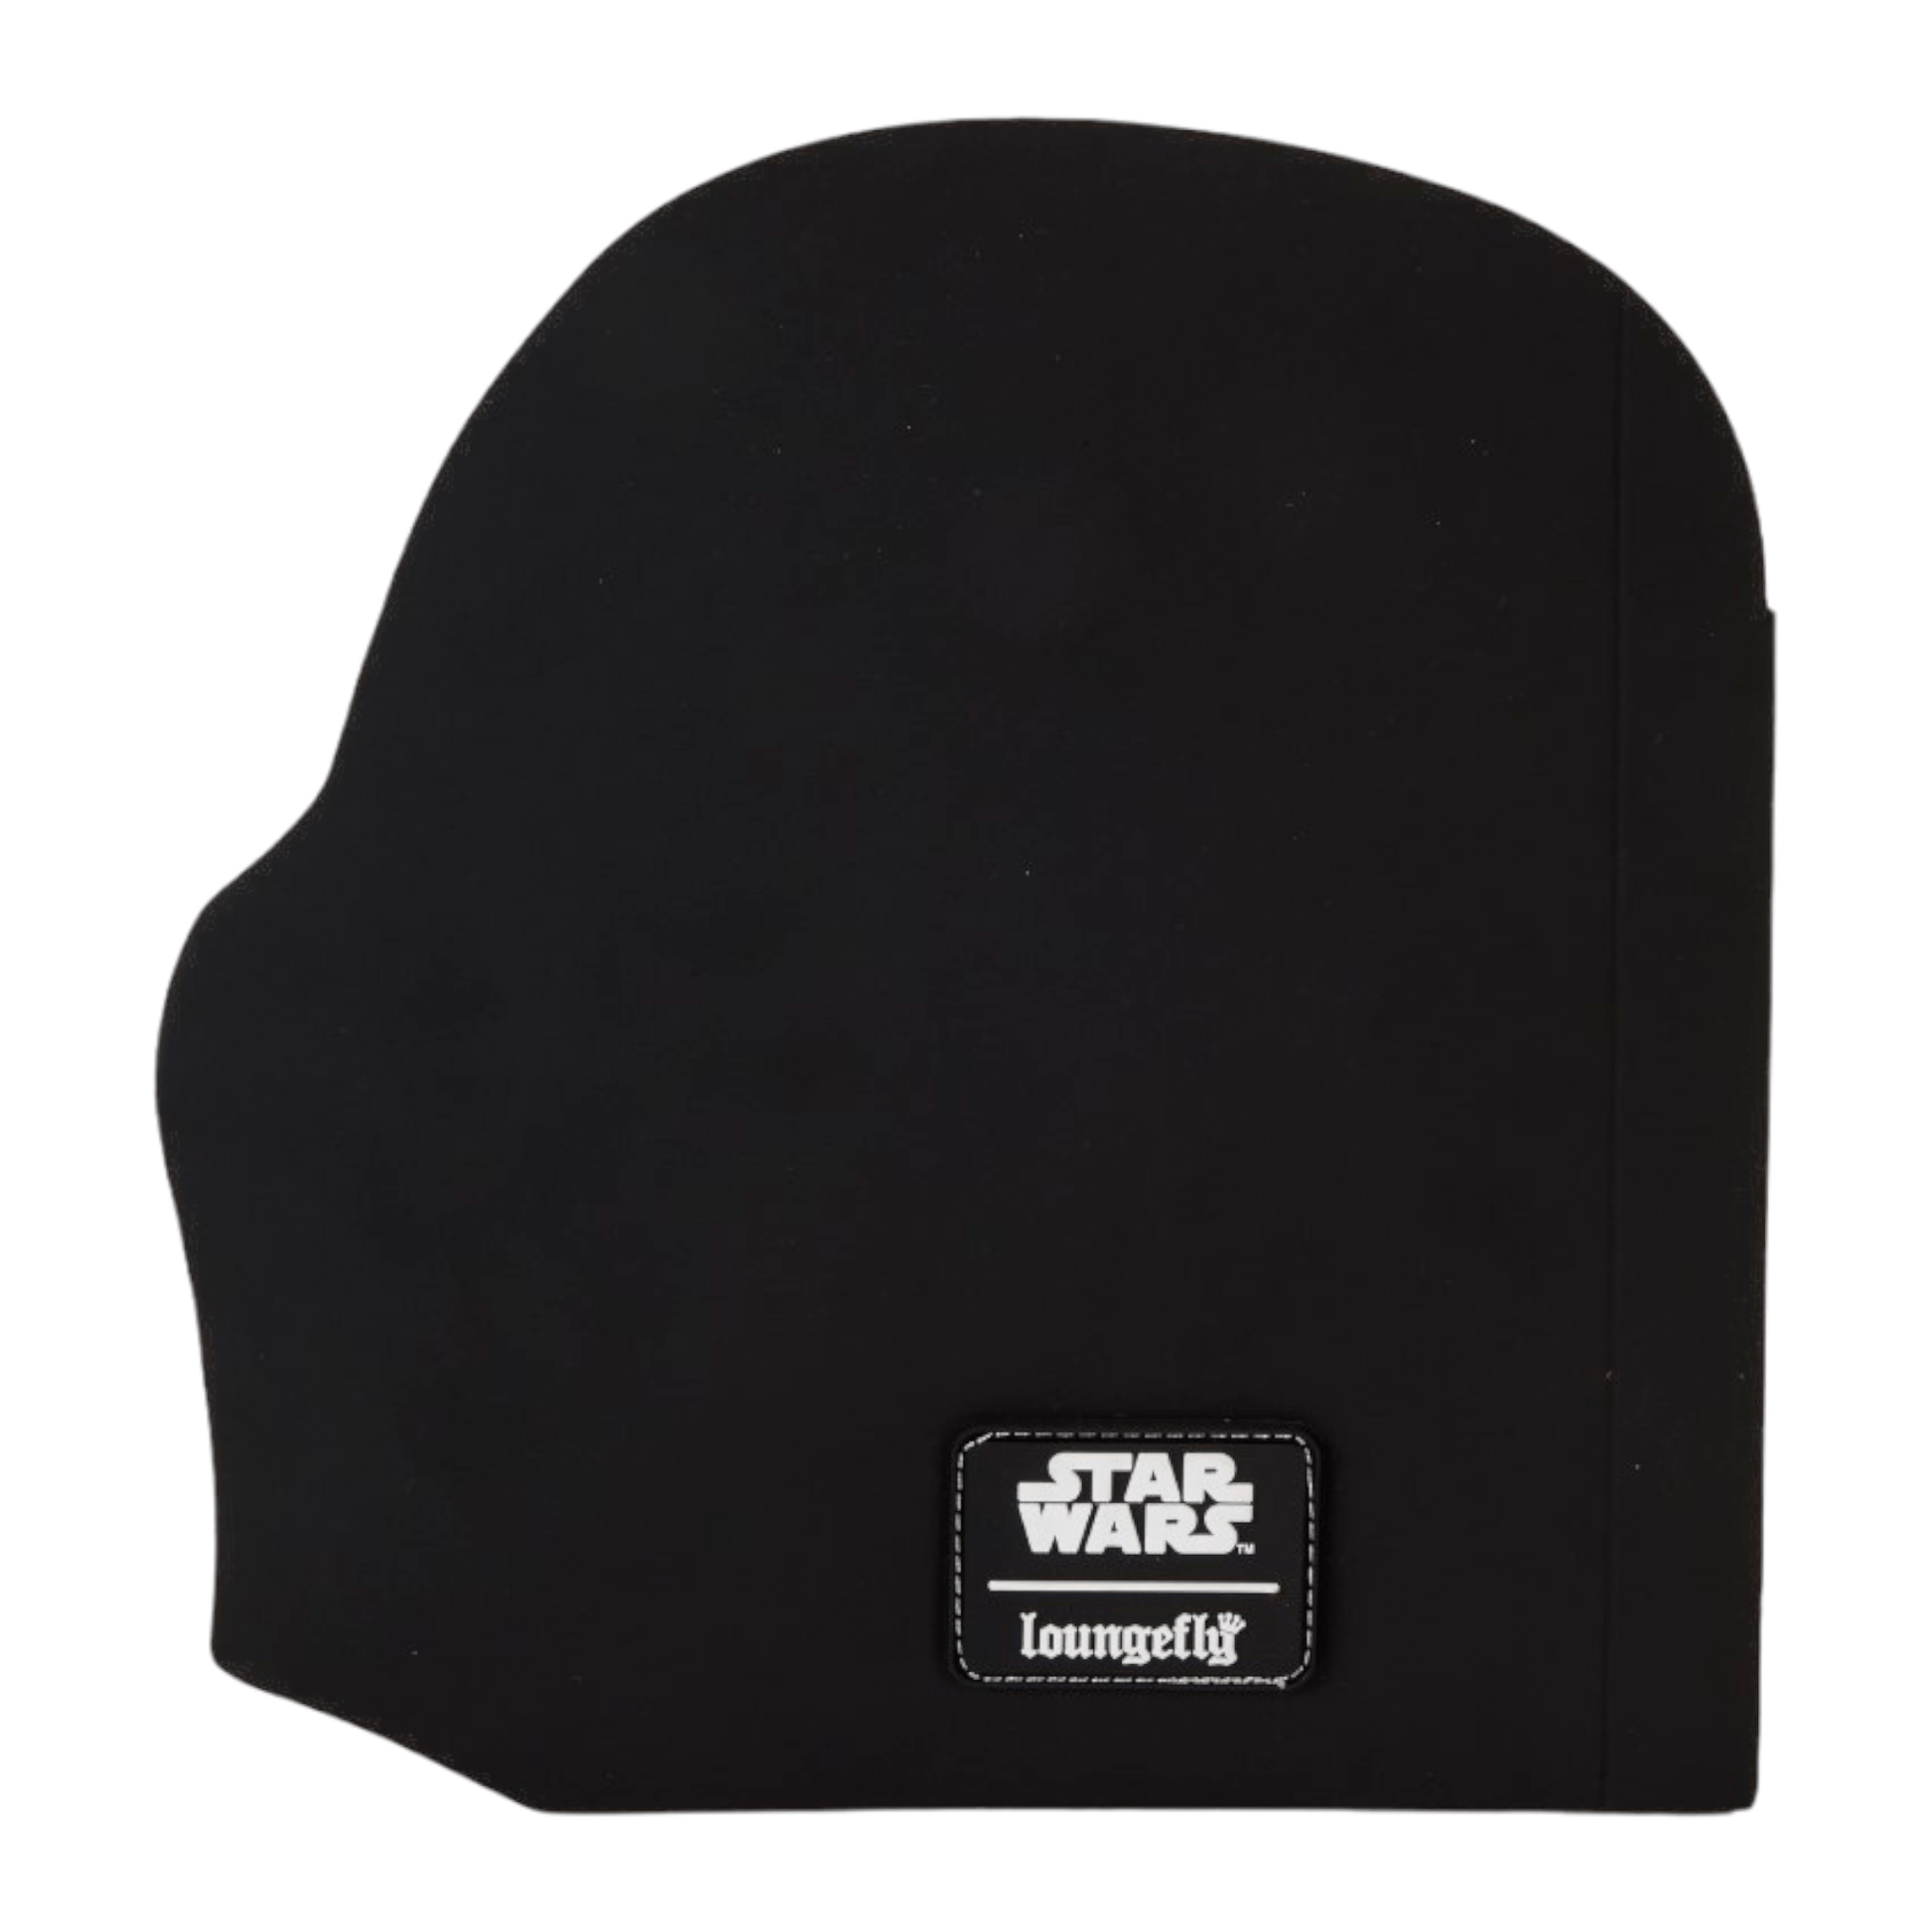 Journal - Stationary Return Of The Jedi - Journal Darth Vader - Star Wars - Loungefly J'M T Créa